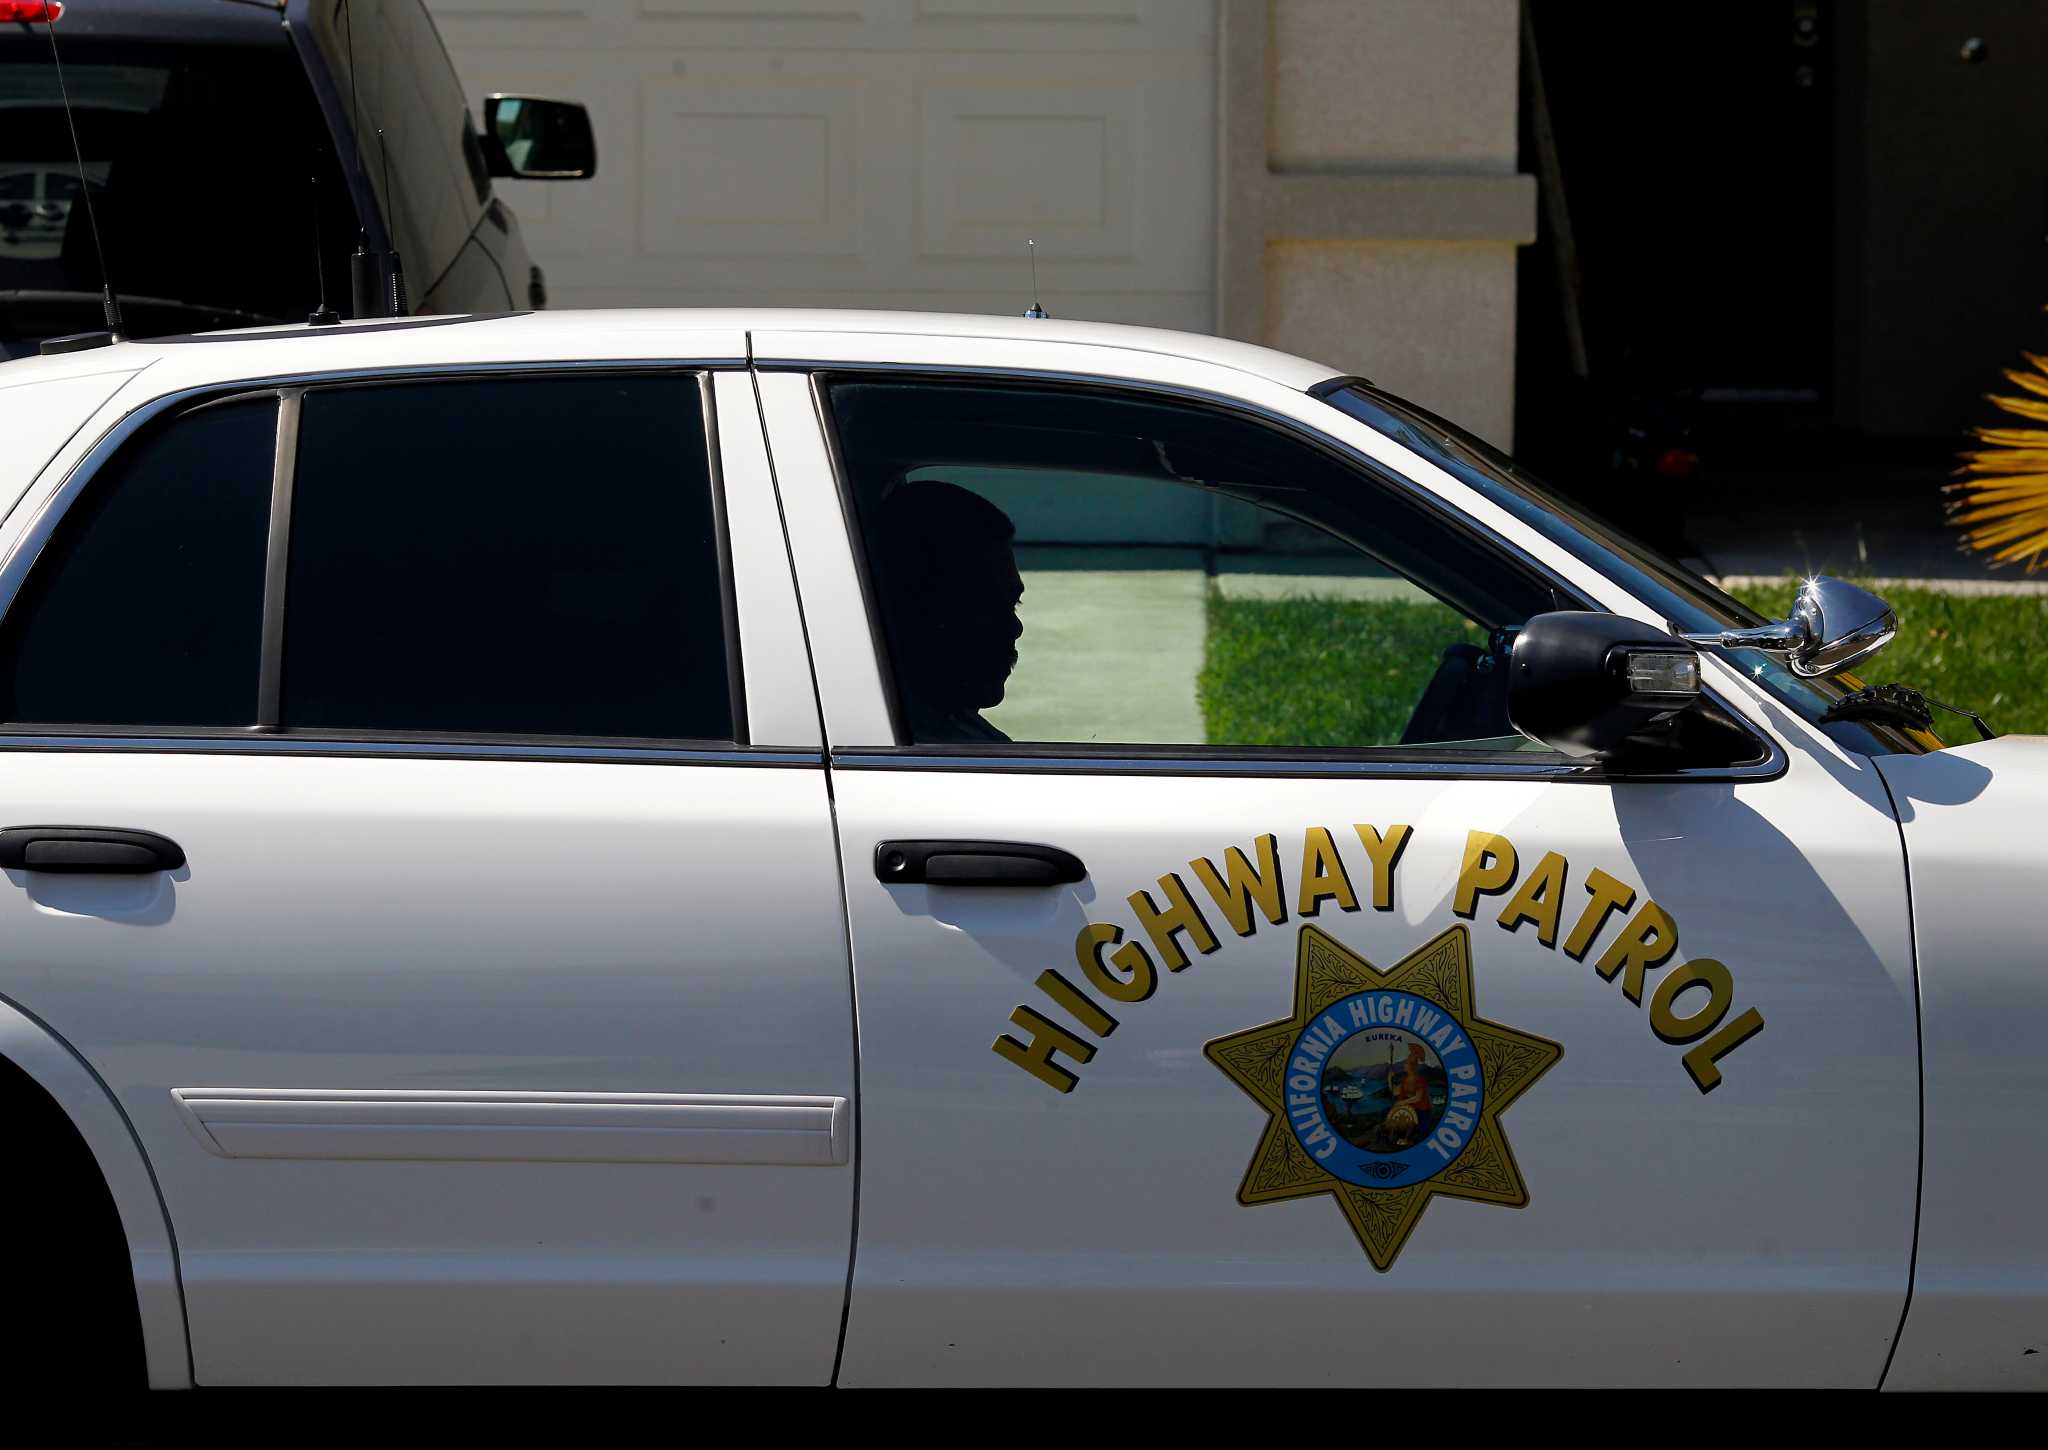 Disturbing Texts In Chp Officers Nude Photo Game Records Show